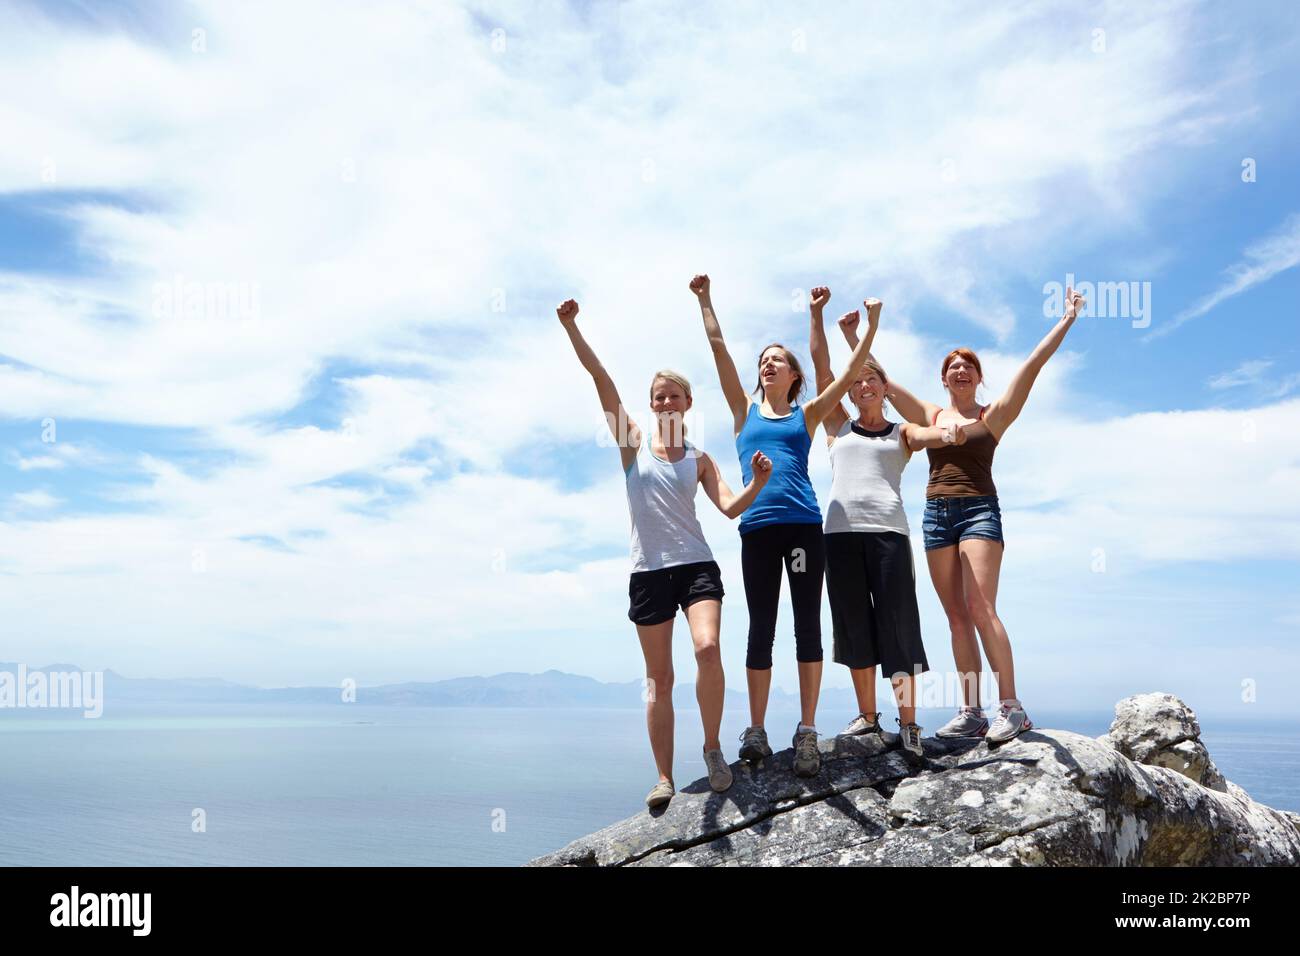 Getting to the top. Shot of a group of friends looking pleased after reaching the peak of a mountain. Stock Photo